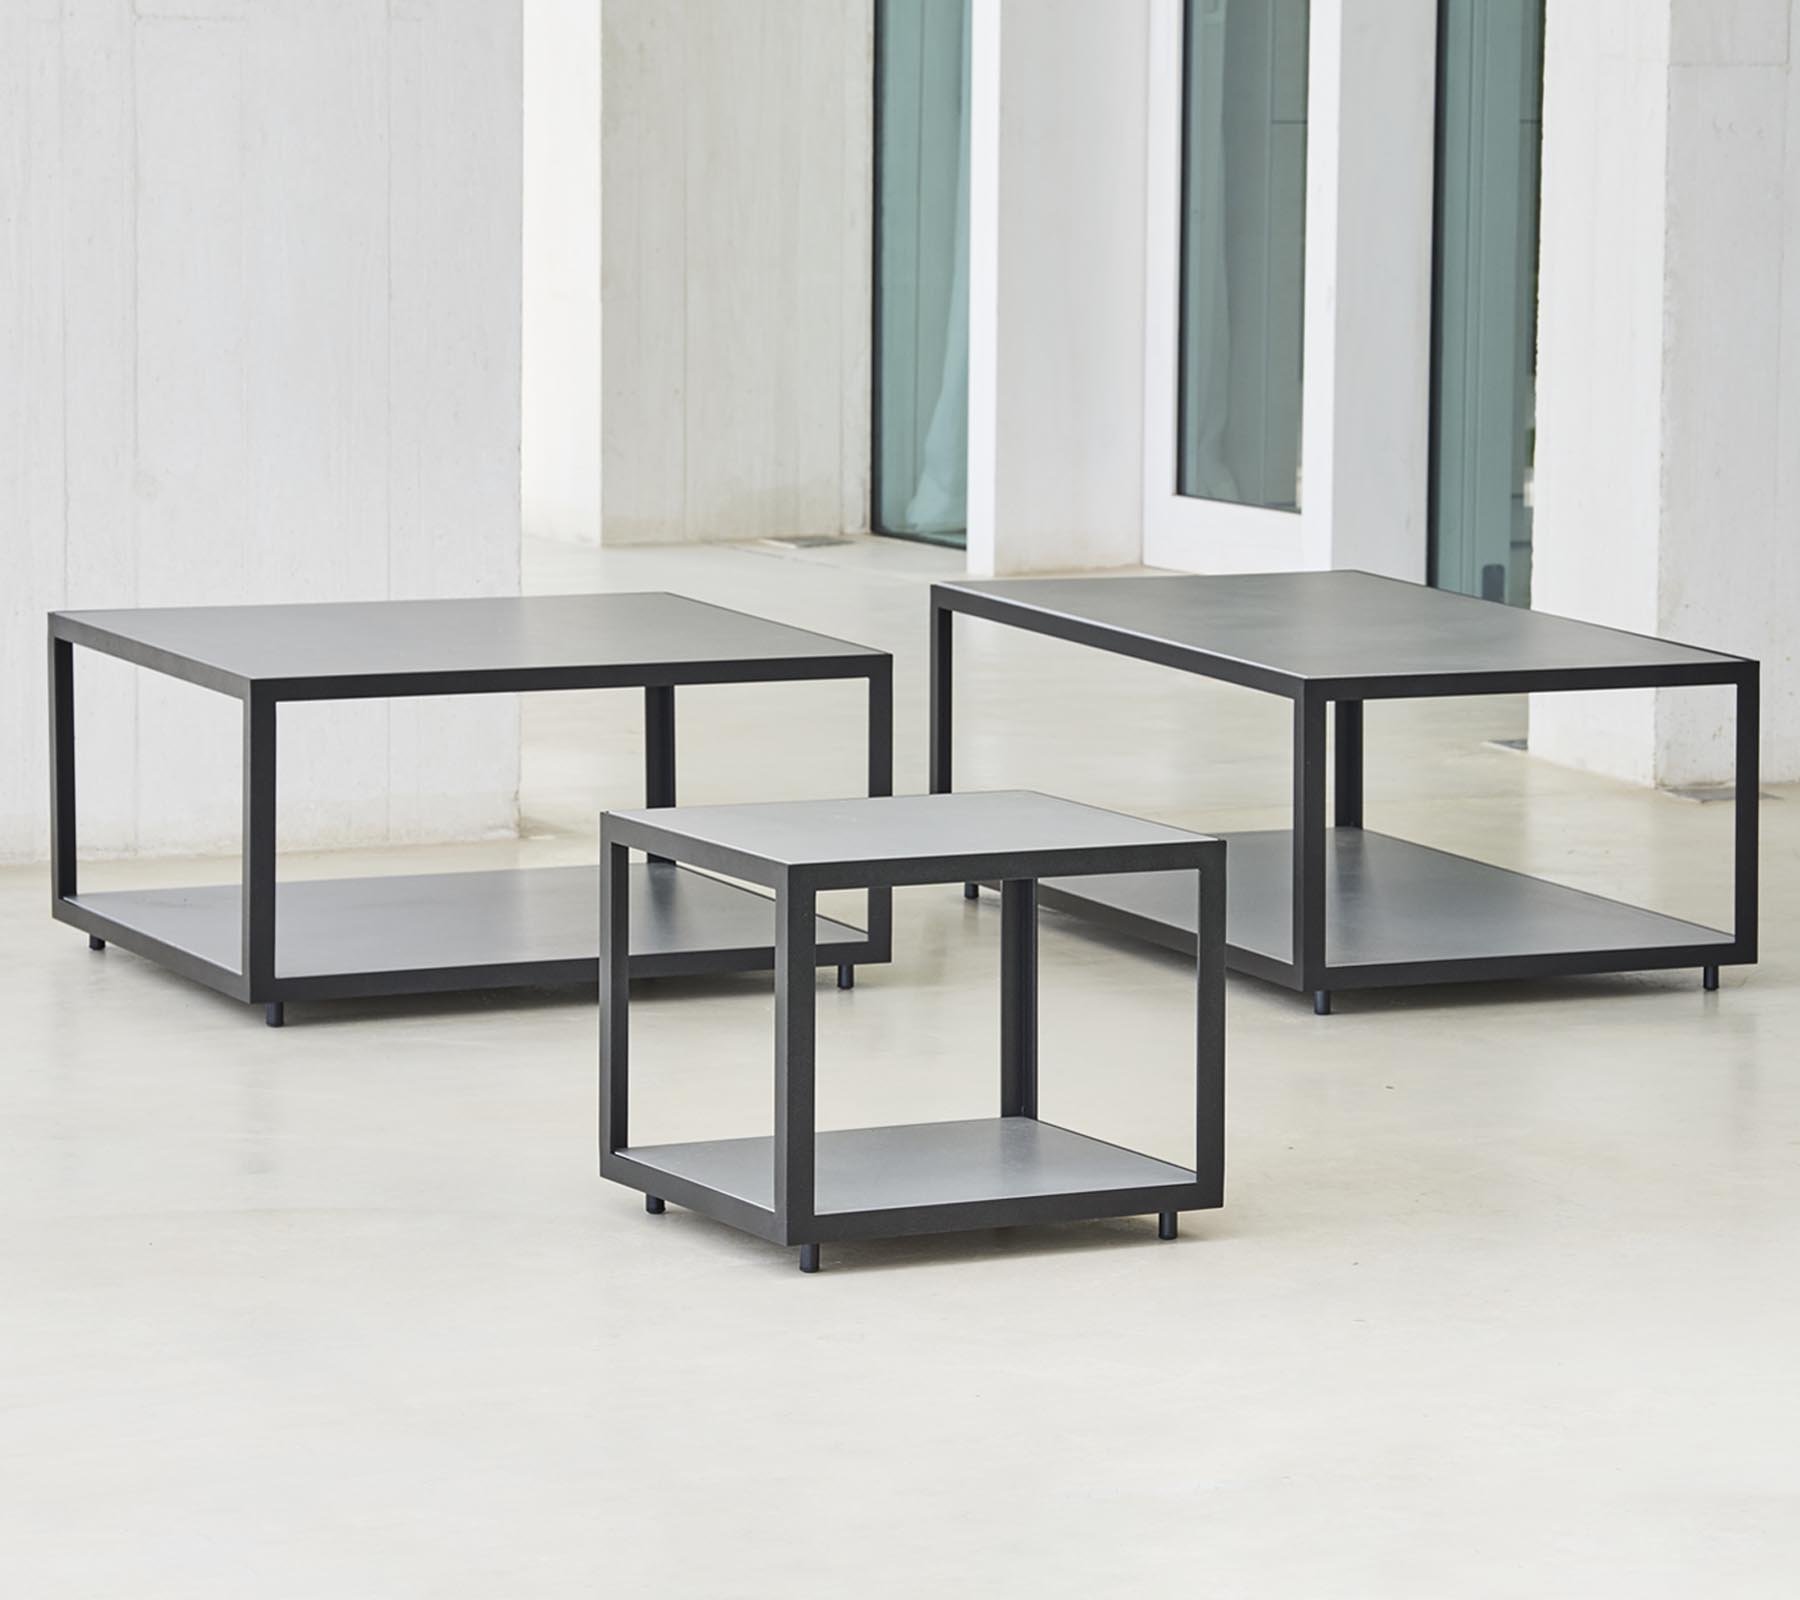 Level Coffee Table from Cane-line, designed by byKATO